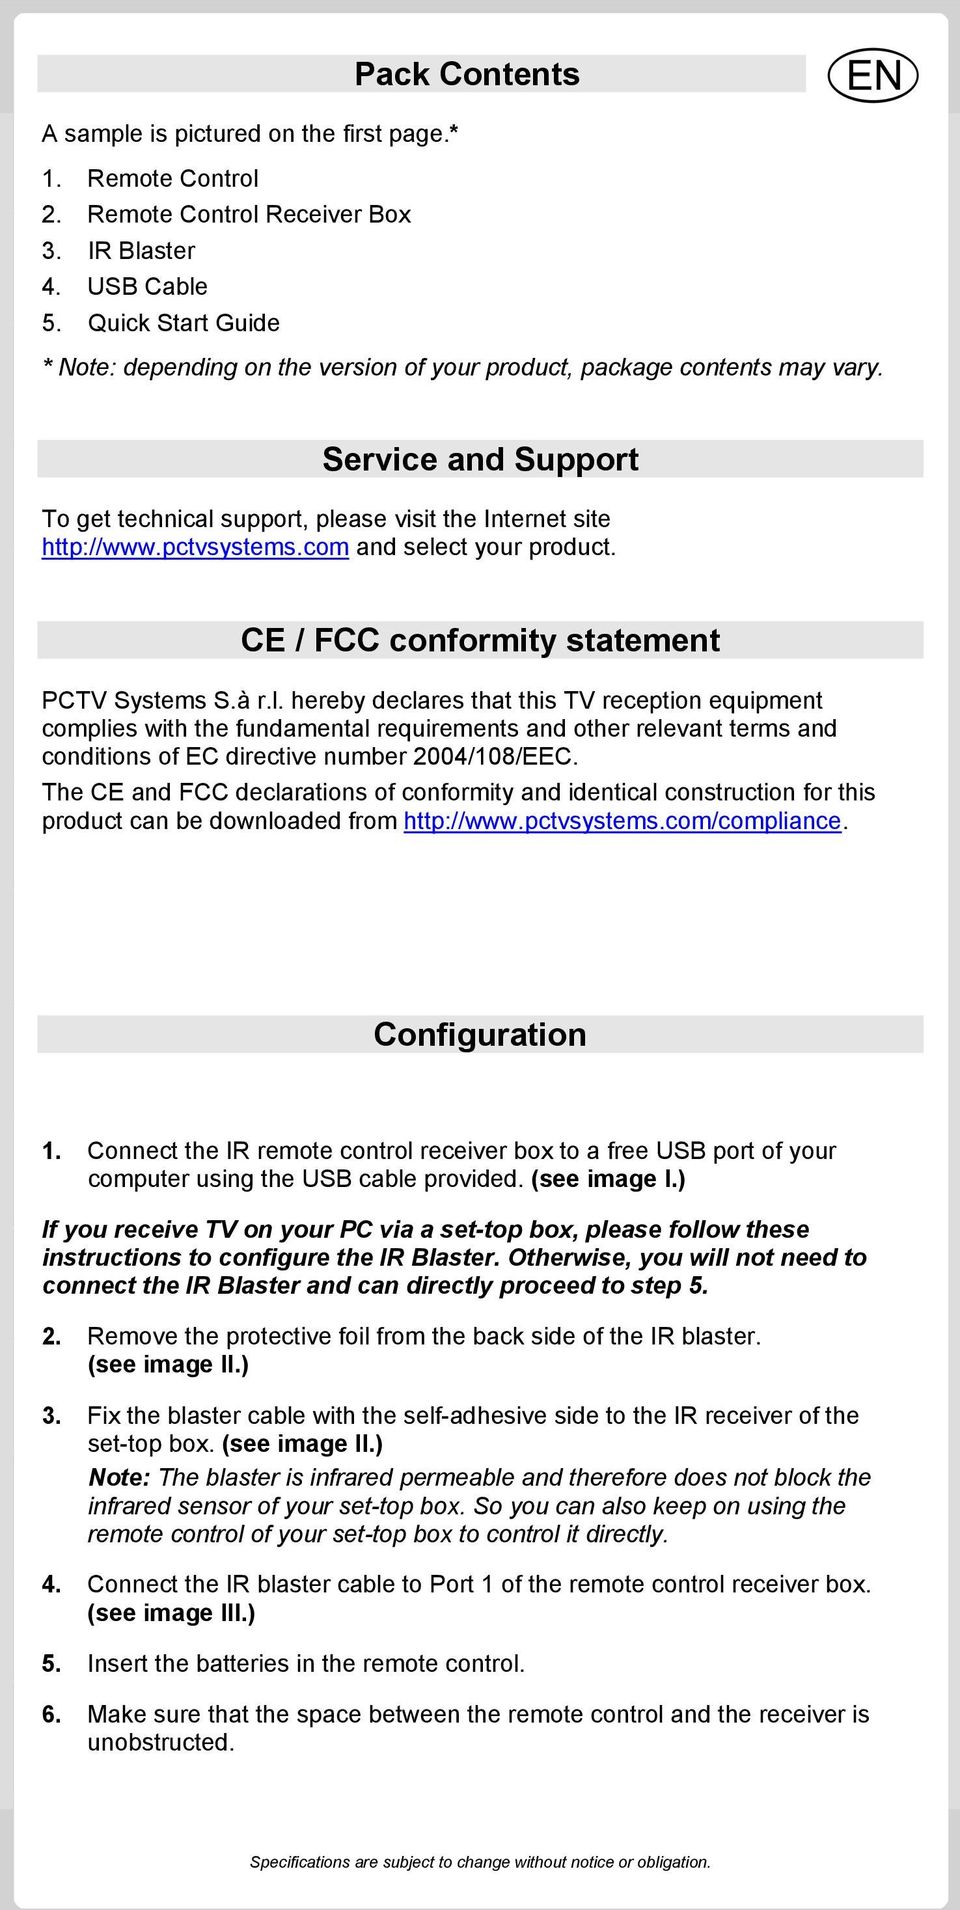 com and select your product. CE / FCC conformity statement PCTV Systems S.à r.l. hereby declares that this TV reception equipment complies with the fundamental requirements and other relevant terms and conditions of EC directive number 2004/108/EEC.